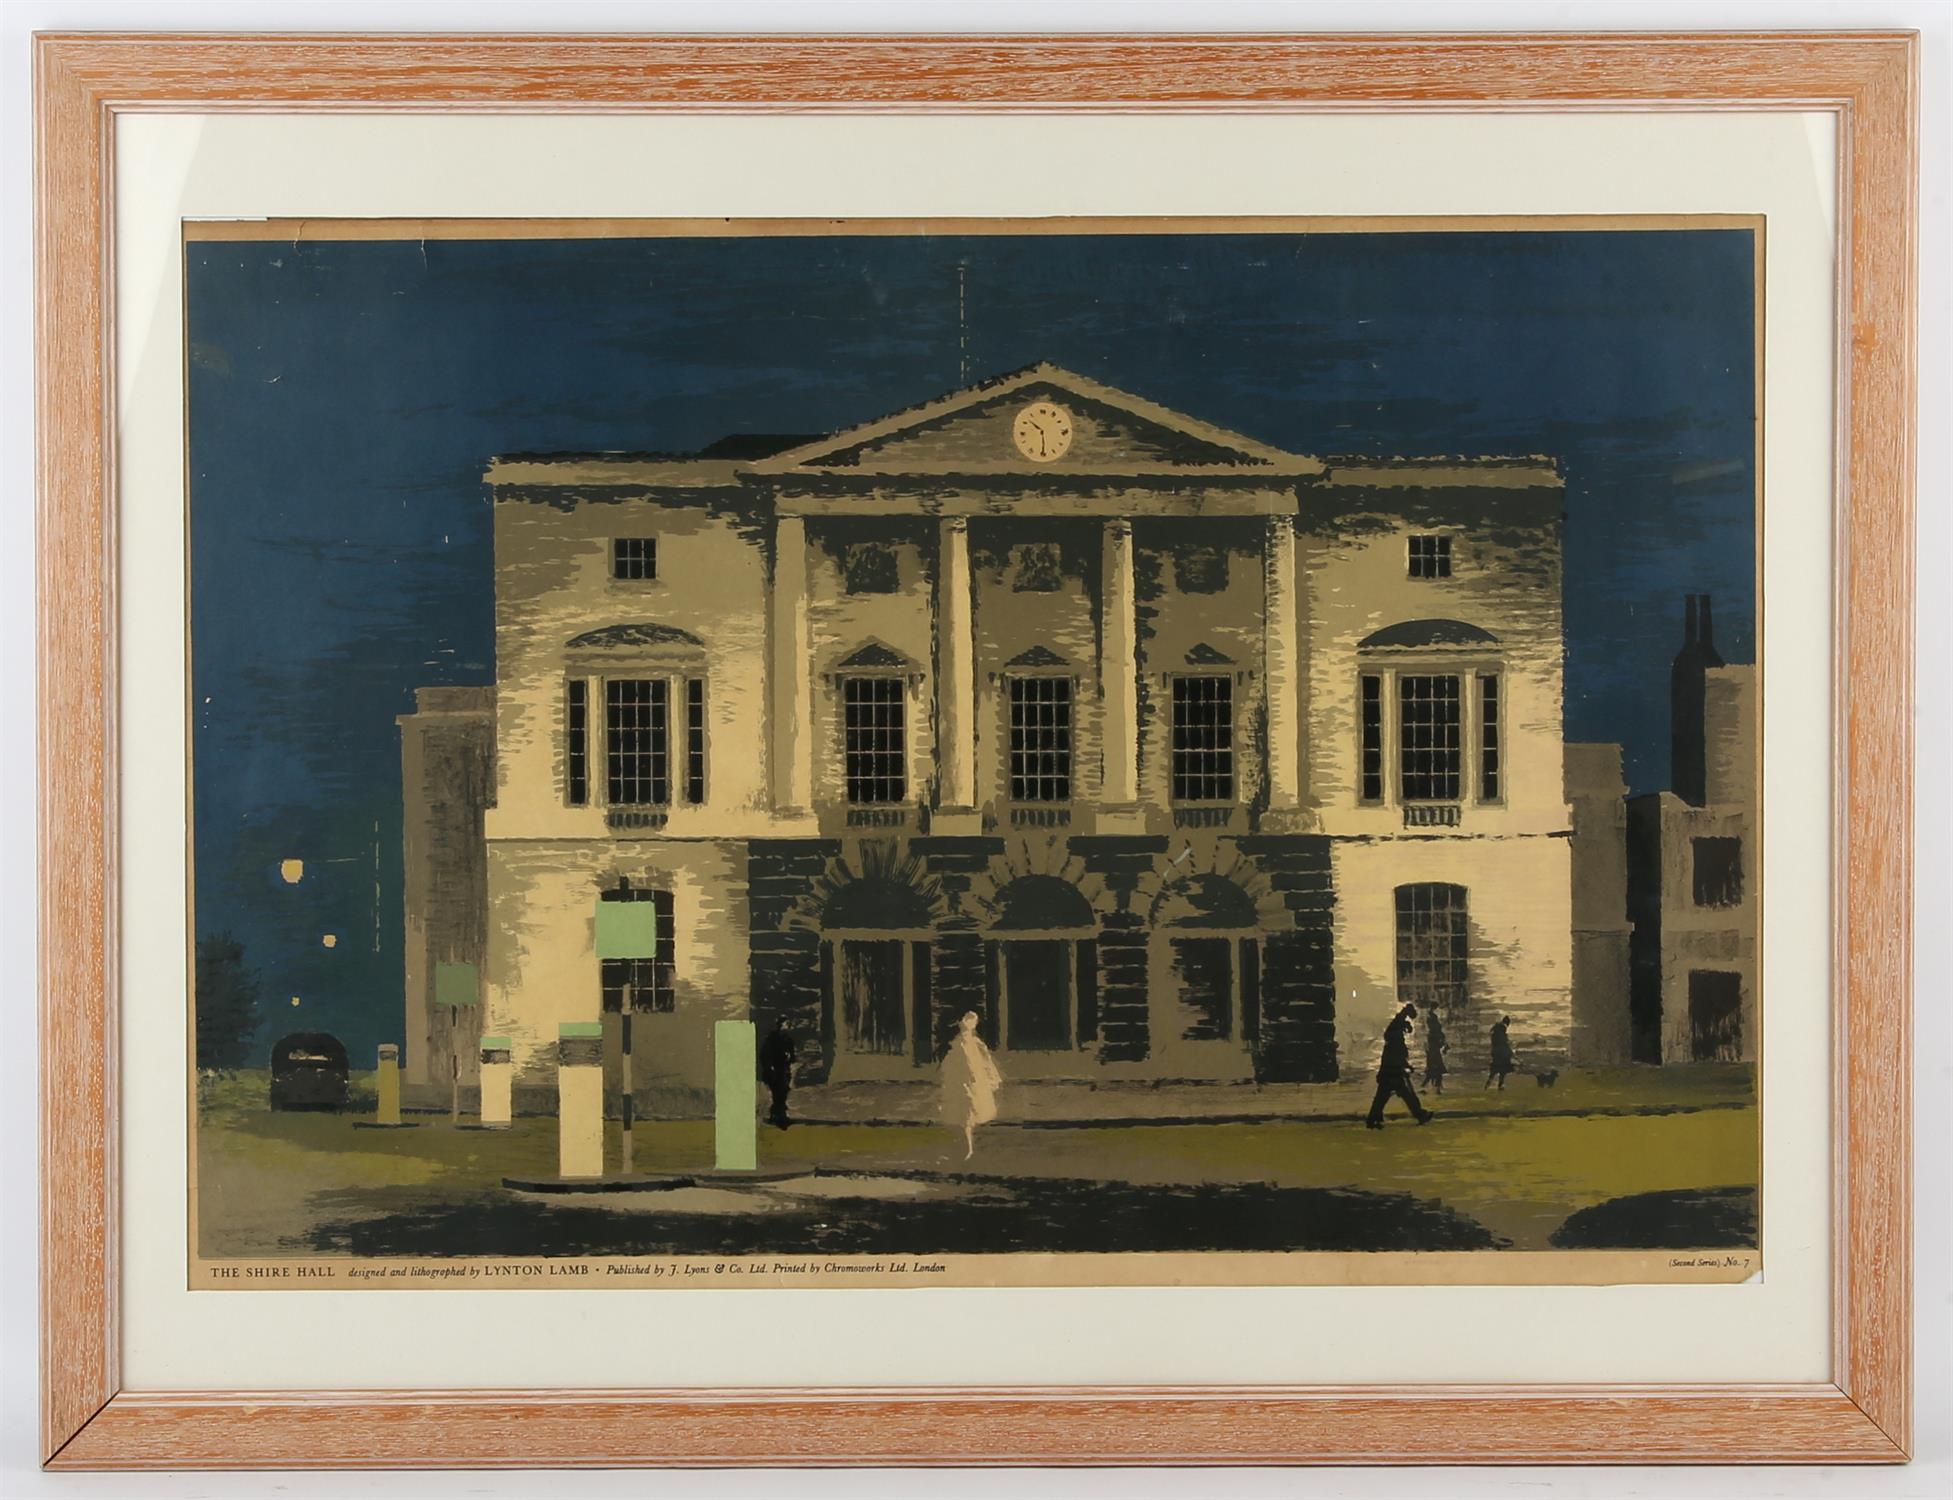 Lynton Lamb (British 1907-1977), The Shire Hall, colour lithograph, published by J. Lyons & Co Ltd, - Image 2 of 4